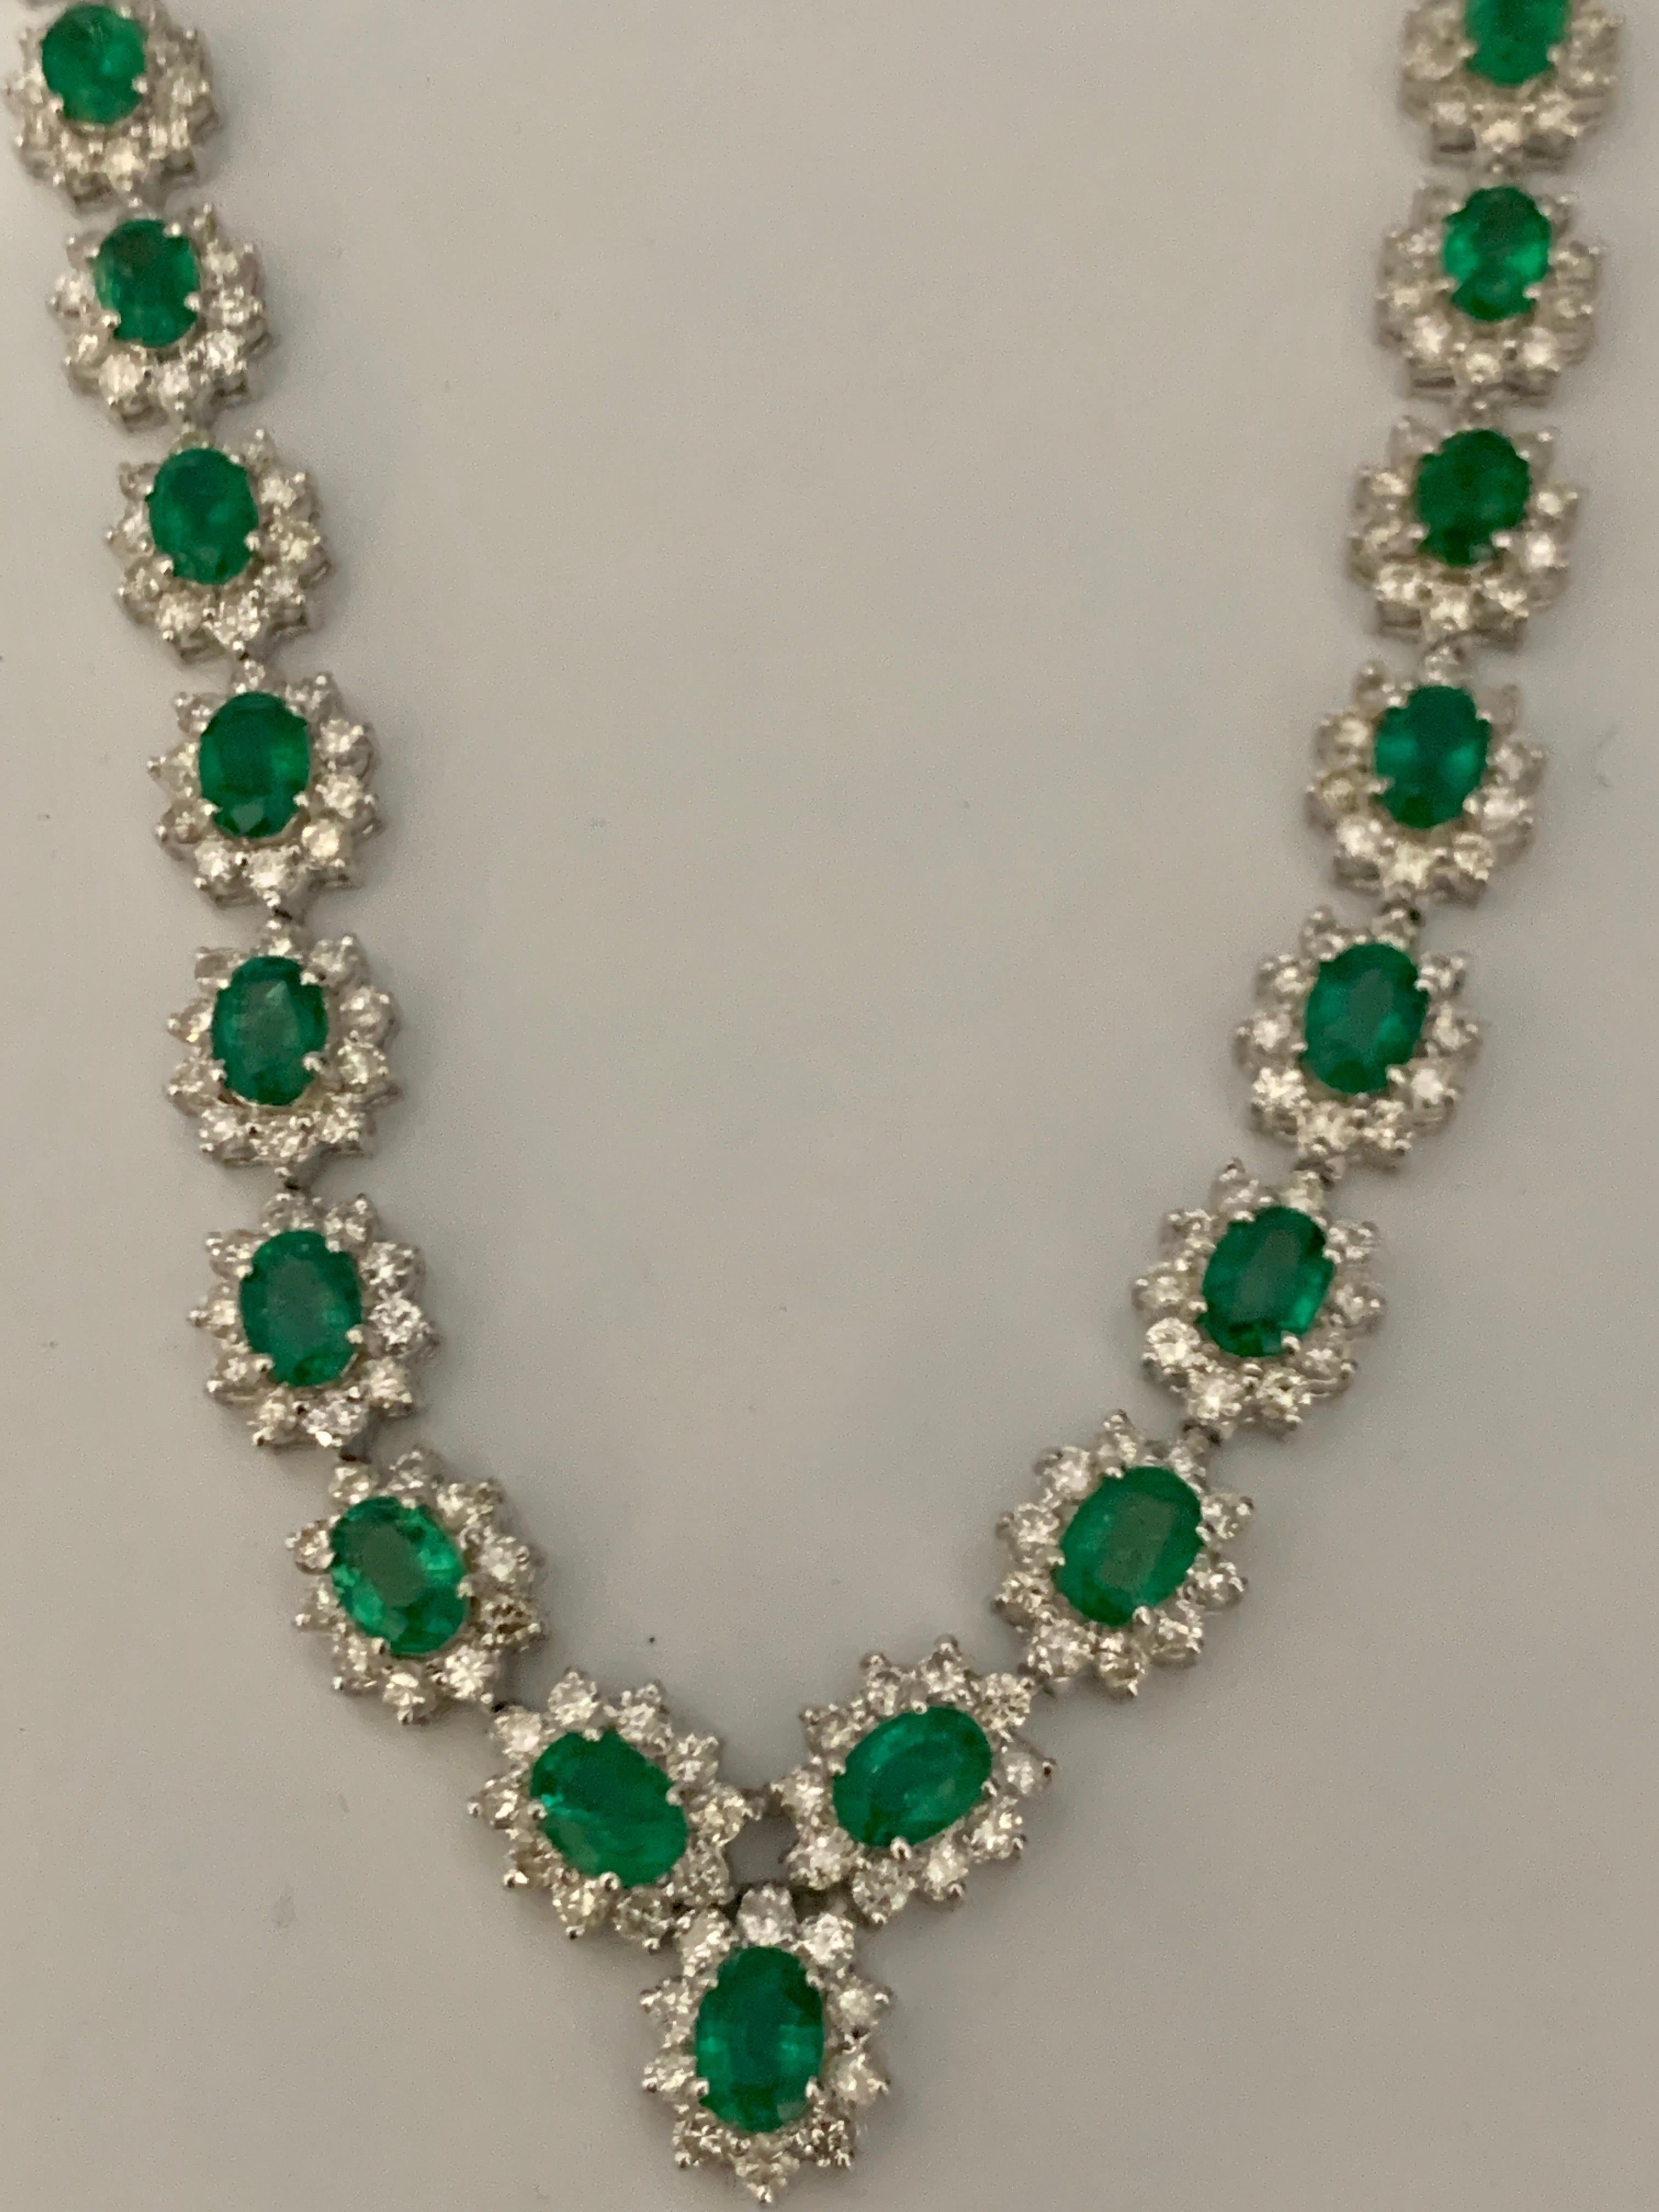 30 Carat Oval Shape Natural Emerald and 23 Carat Diamond Necklace in 18 ...